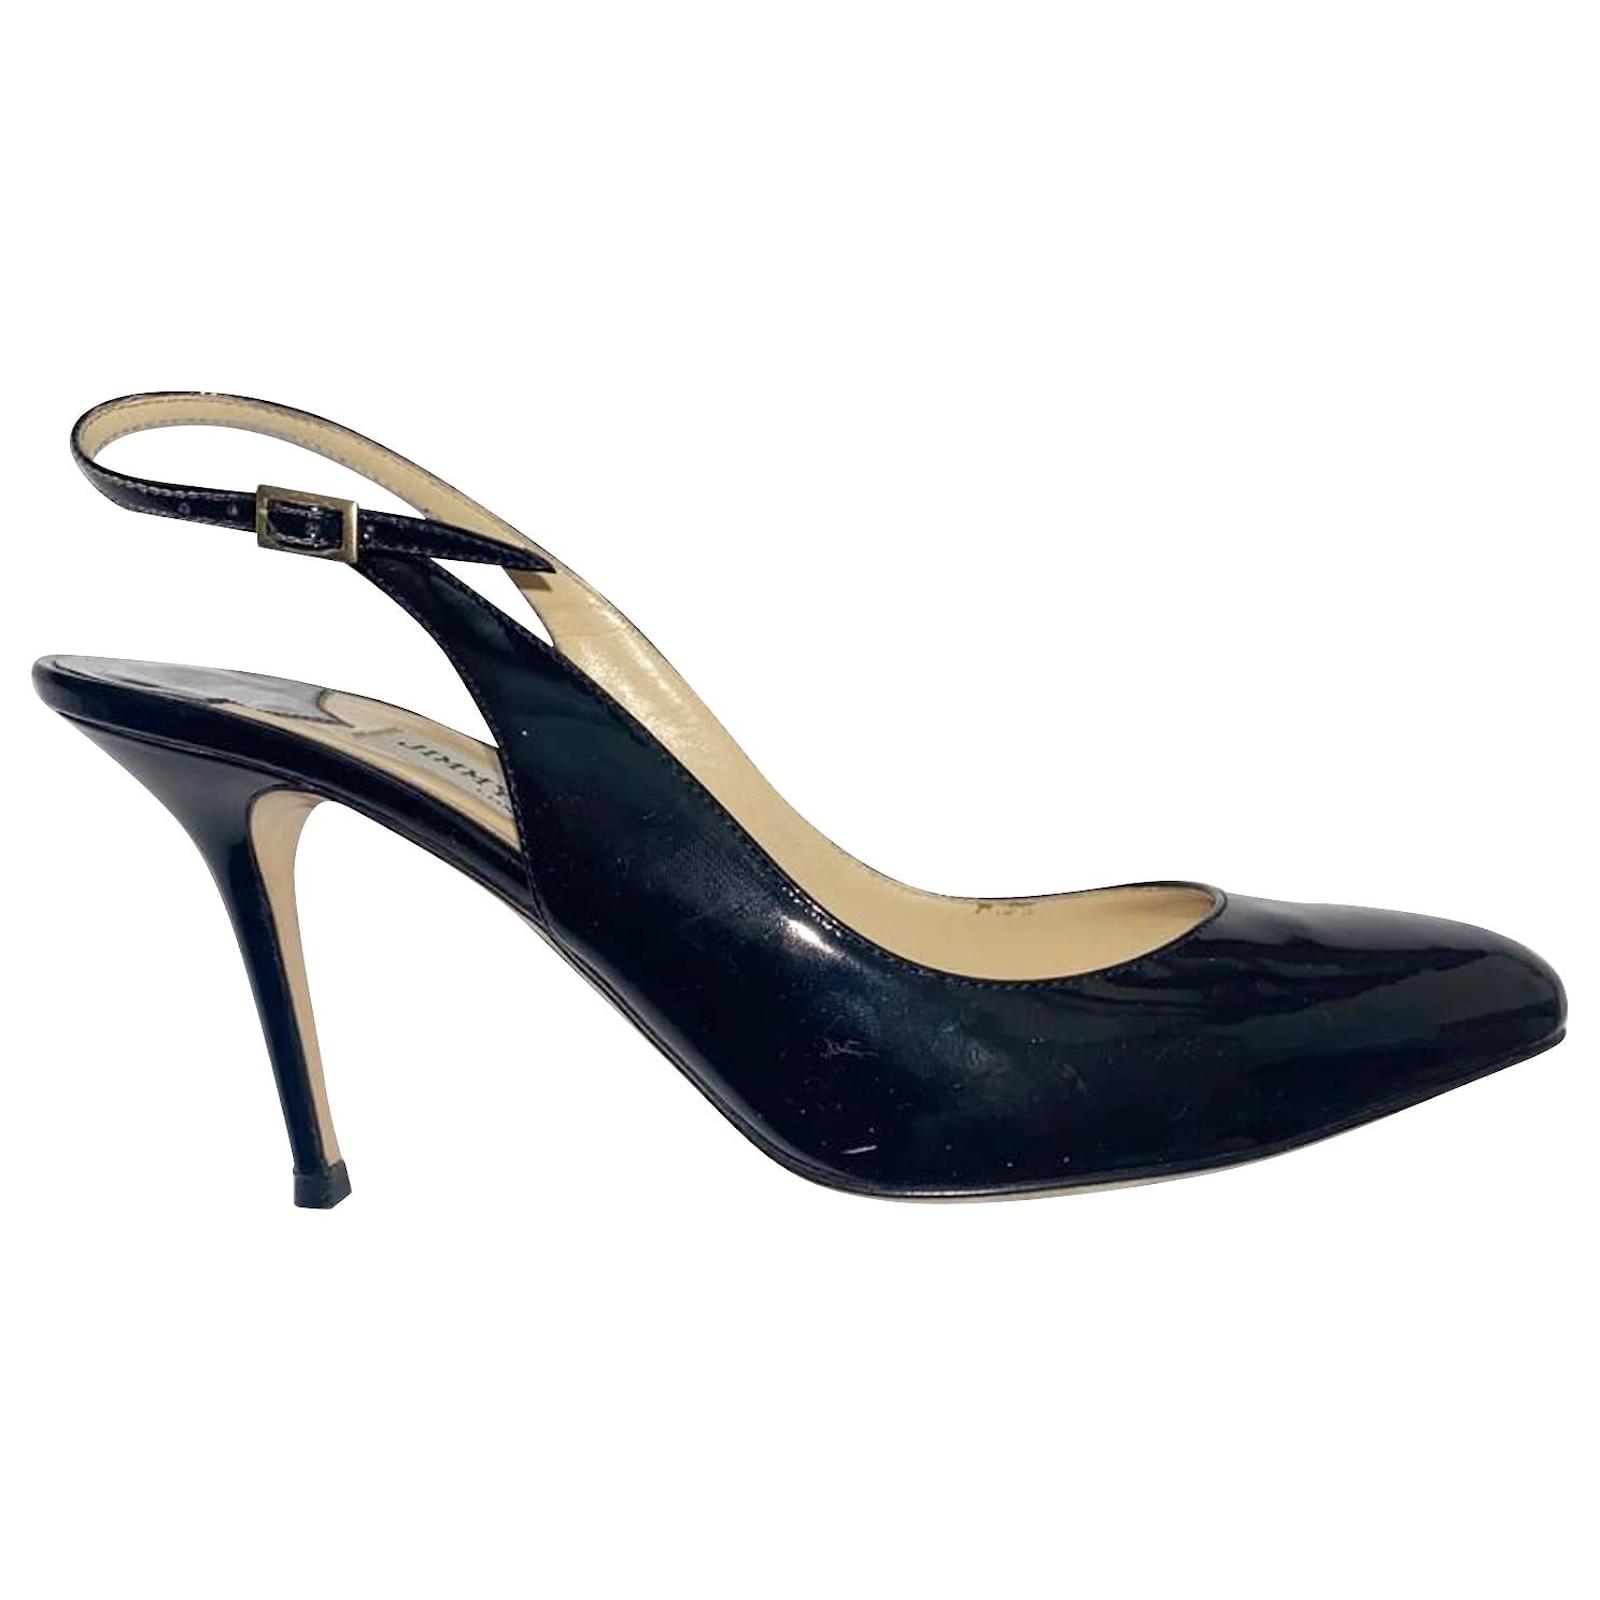 Jimmy Choo Slingback Heels in Black Patent Leather Patent leather ref ...